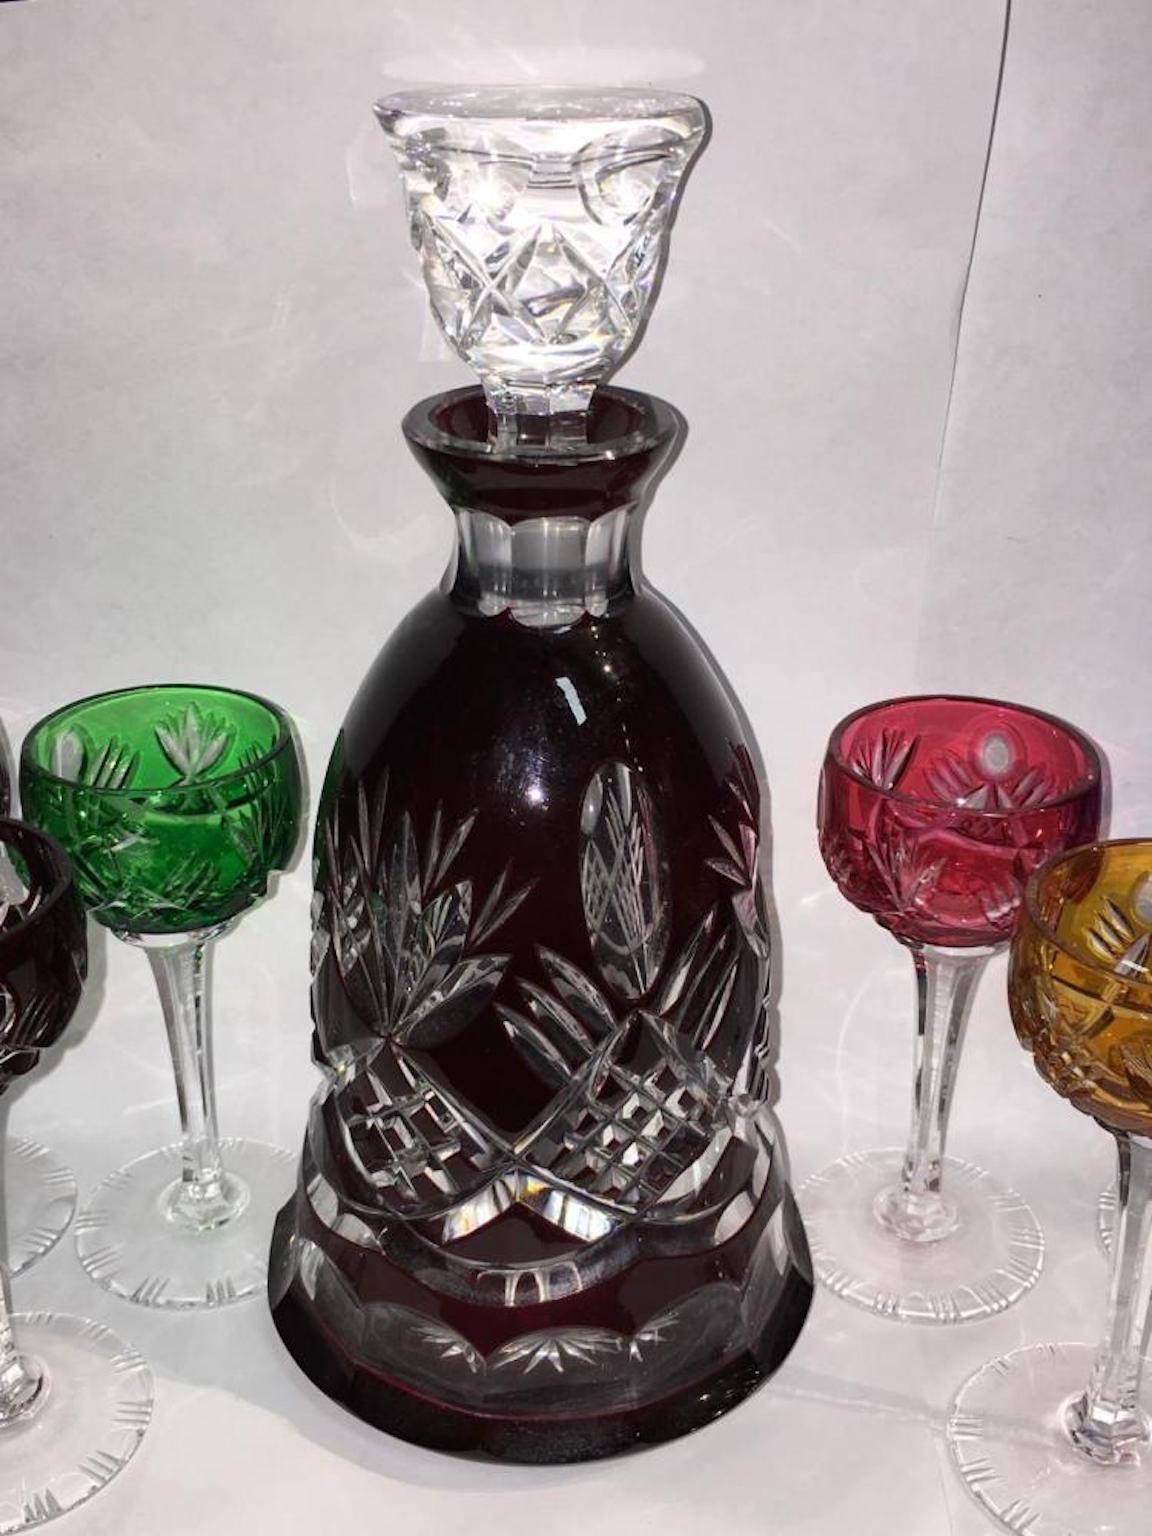 Set includes decanter with decorated stopper, measure: height 9.25